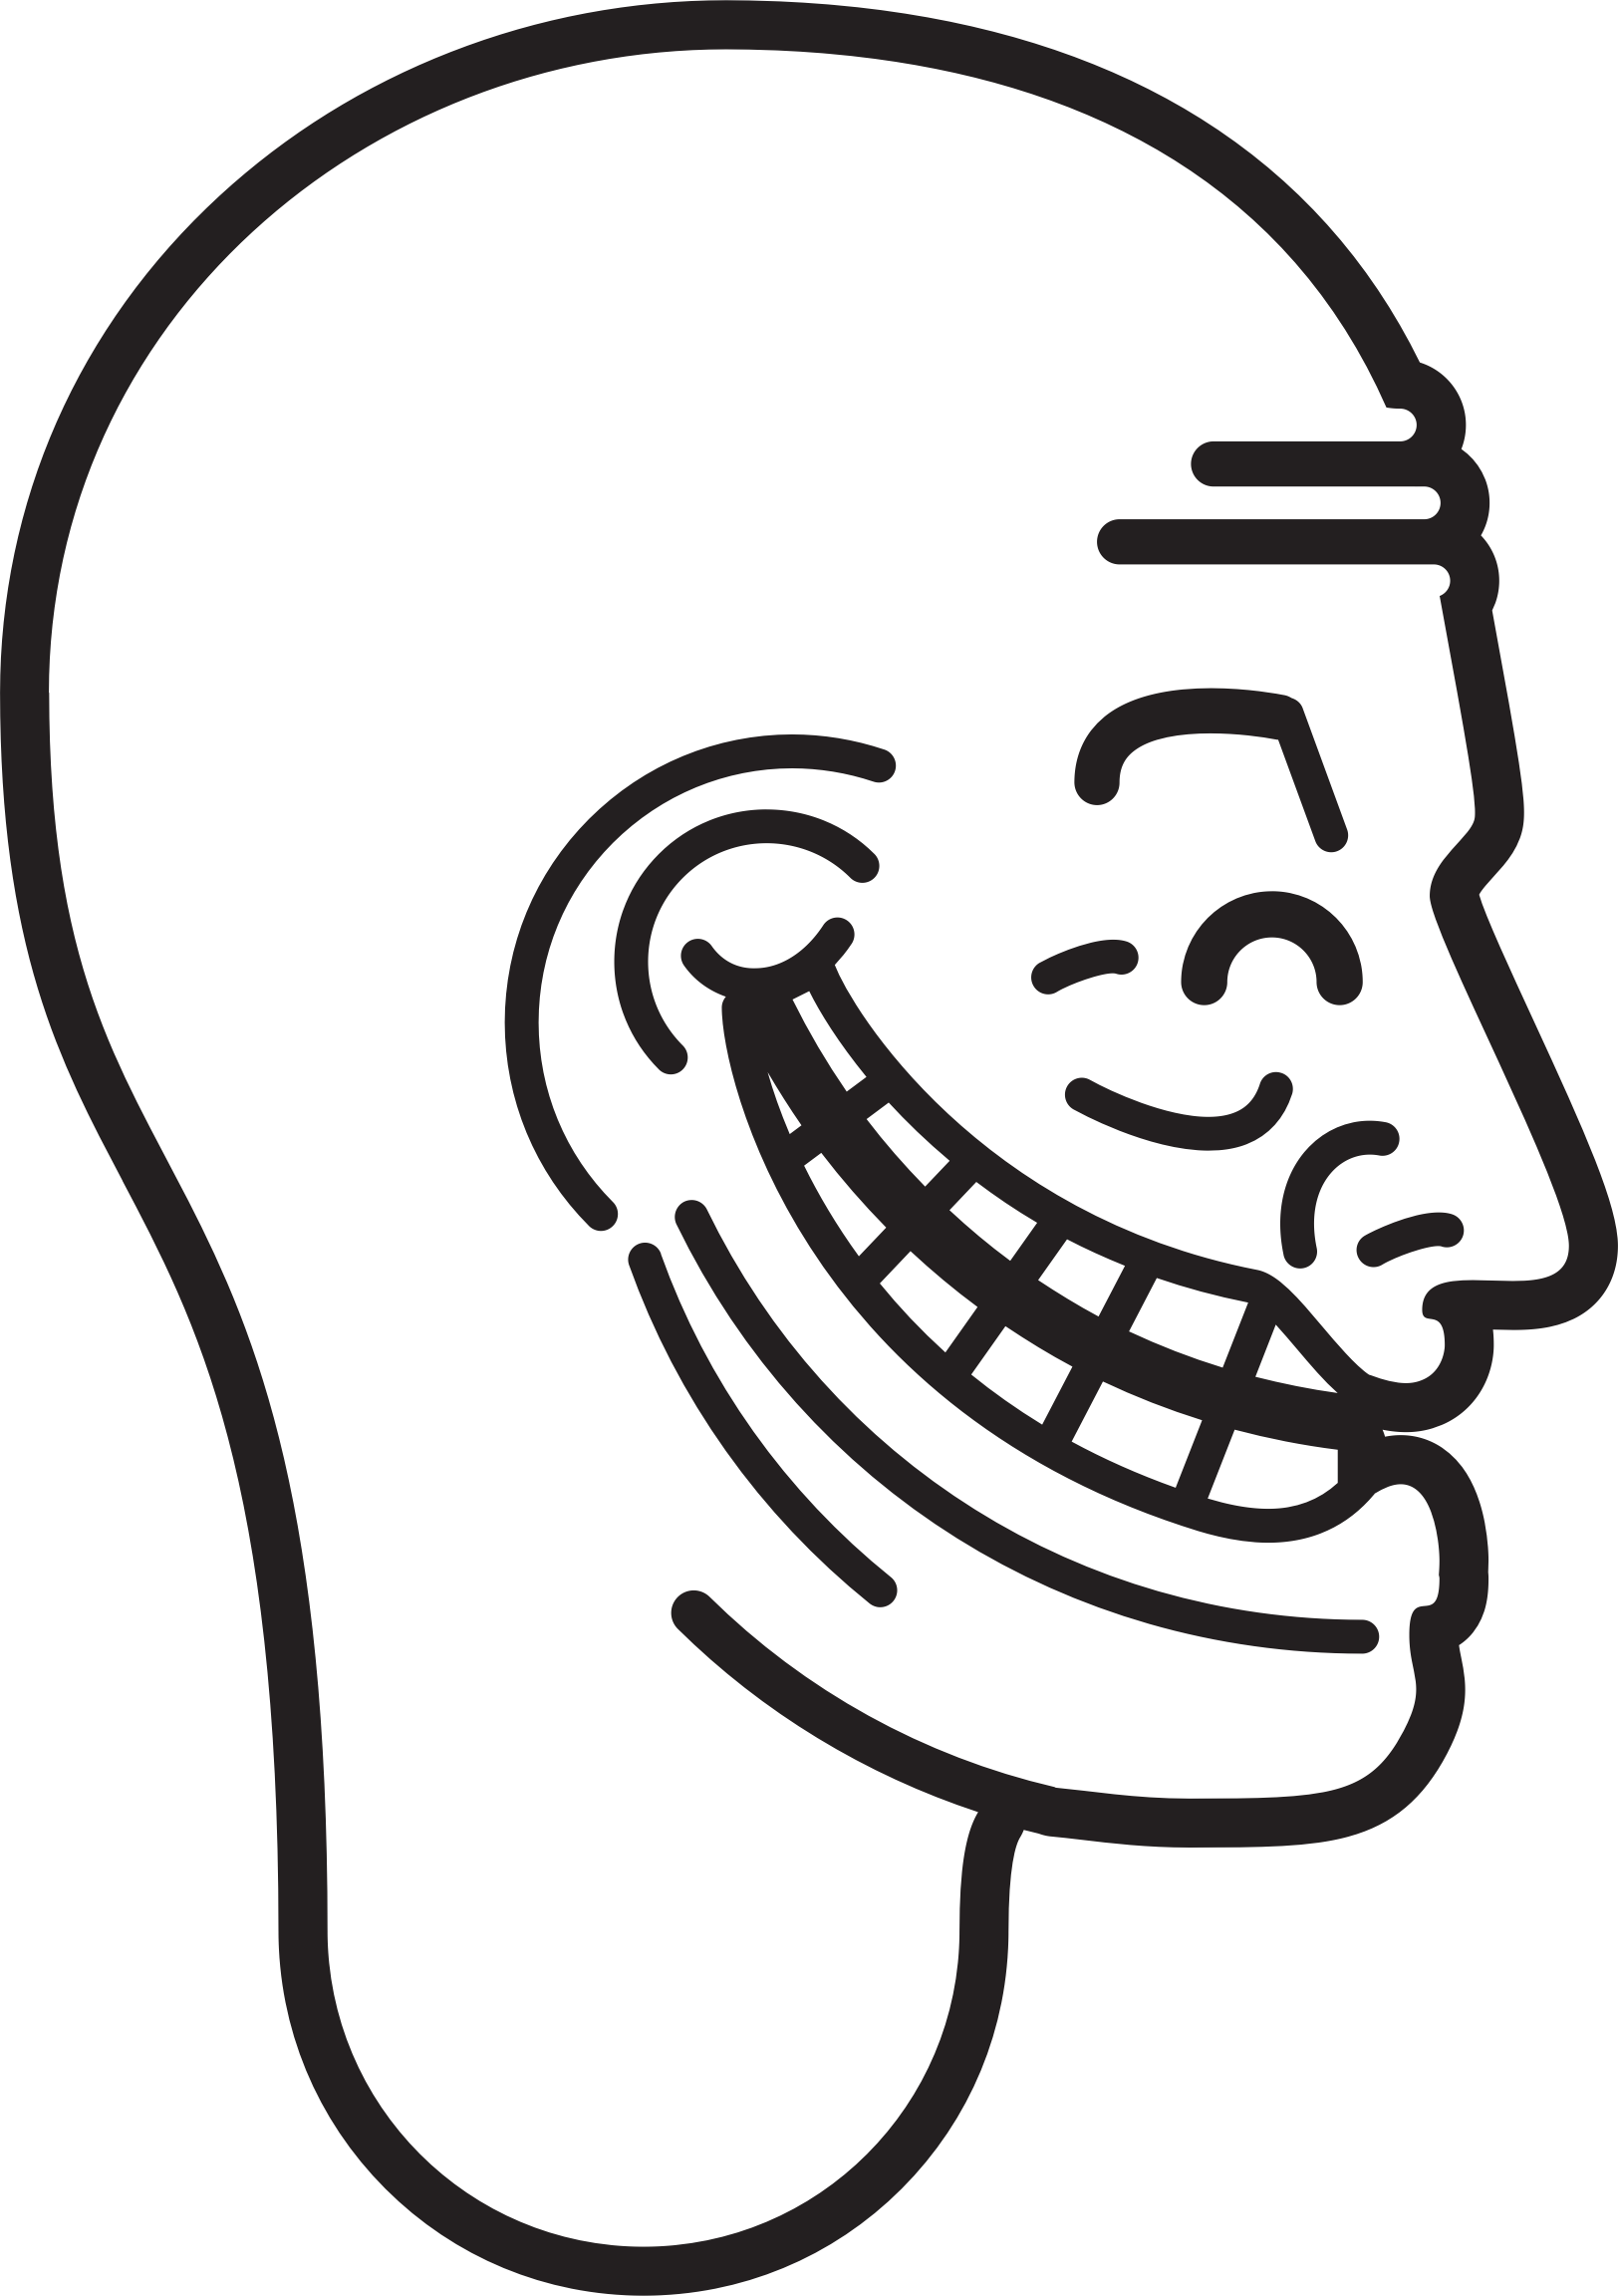 troll face clipart - Clipground